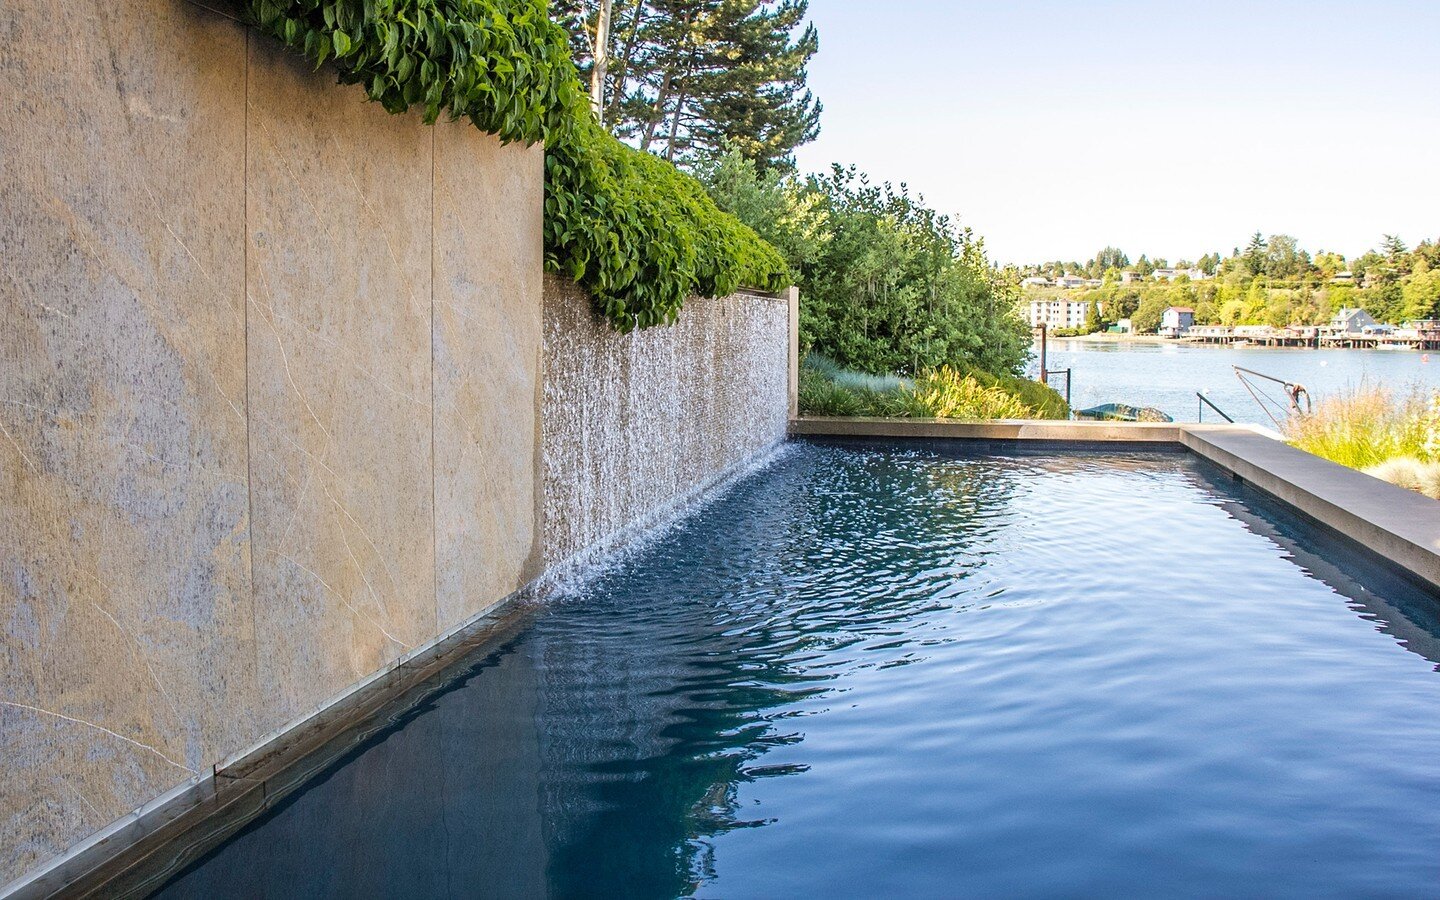 One of our all-time favorites: We love the clean lines on this Seattle swimming pool, which doubles as a beautiful water feature.  By @landmorphology

#waterfeature #seattlegarden #swimmingpool #waterfrontrealestate #activegarden #landscape #seattled